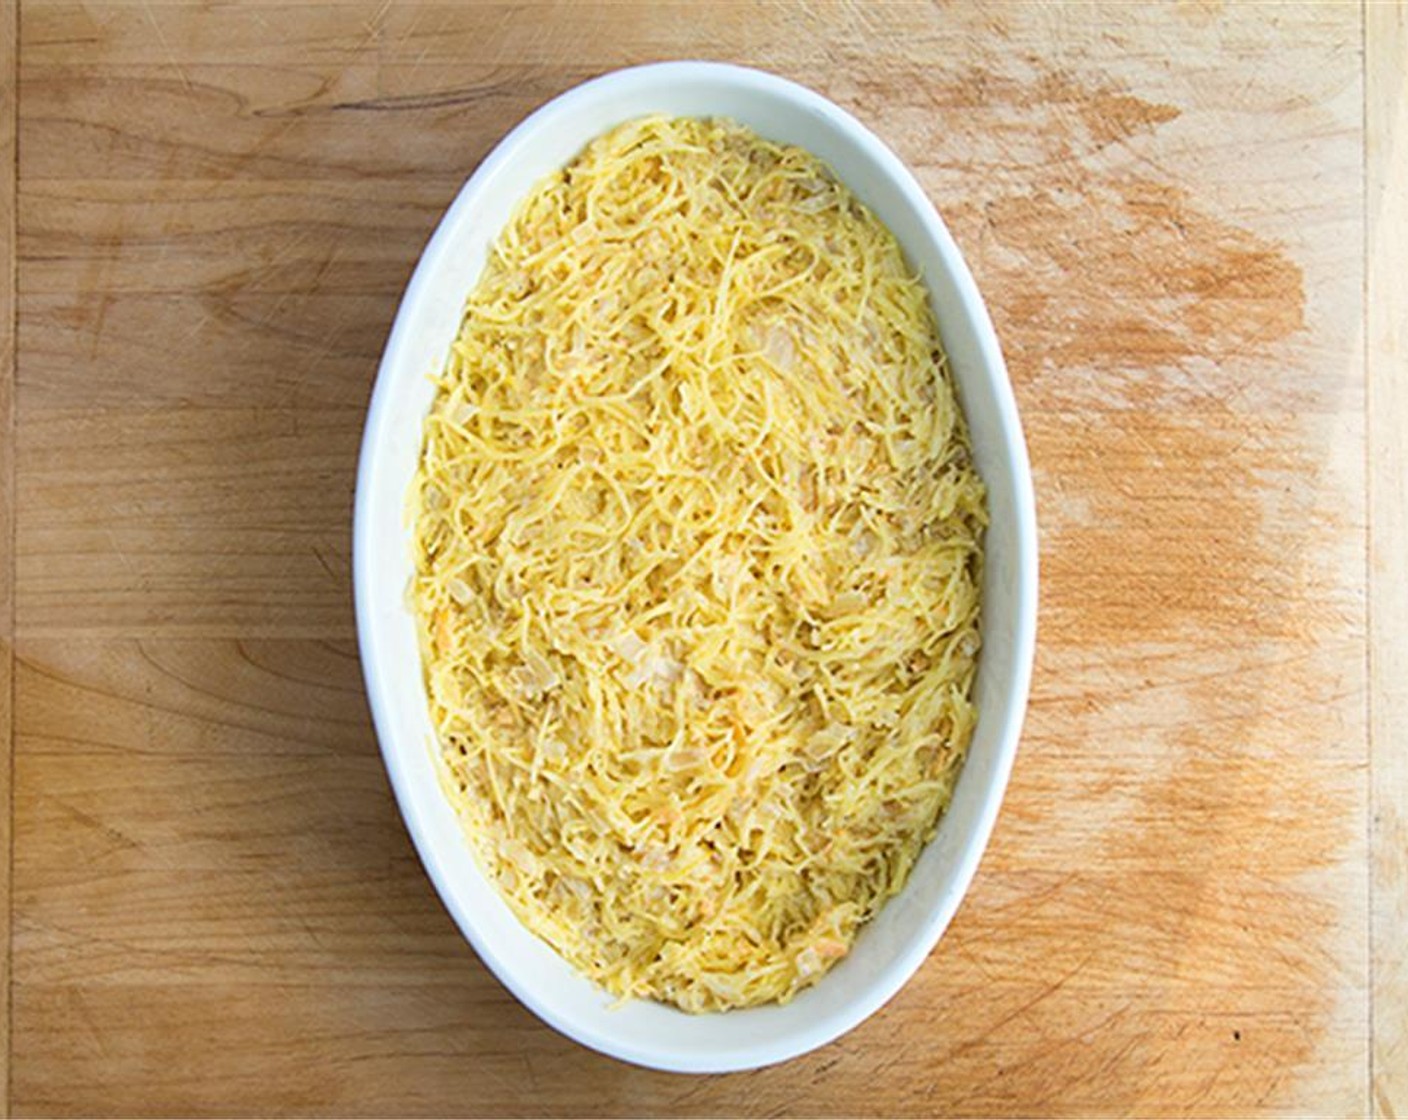 step 7 Transfer the mixture to a roughly 2.5 quart casserole dish and smooth the top with a spatula. Sprinkle the remaining shredded cheese over the top, and return to the oven to bake for 30 minutes at 400 degrees F (200 degrees C).